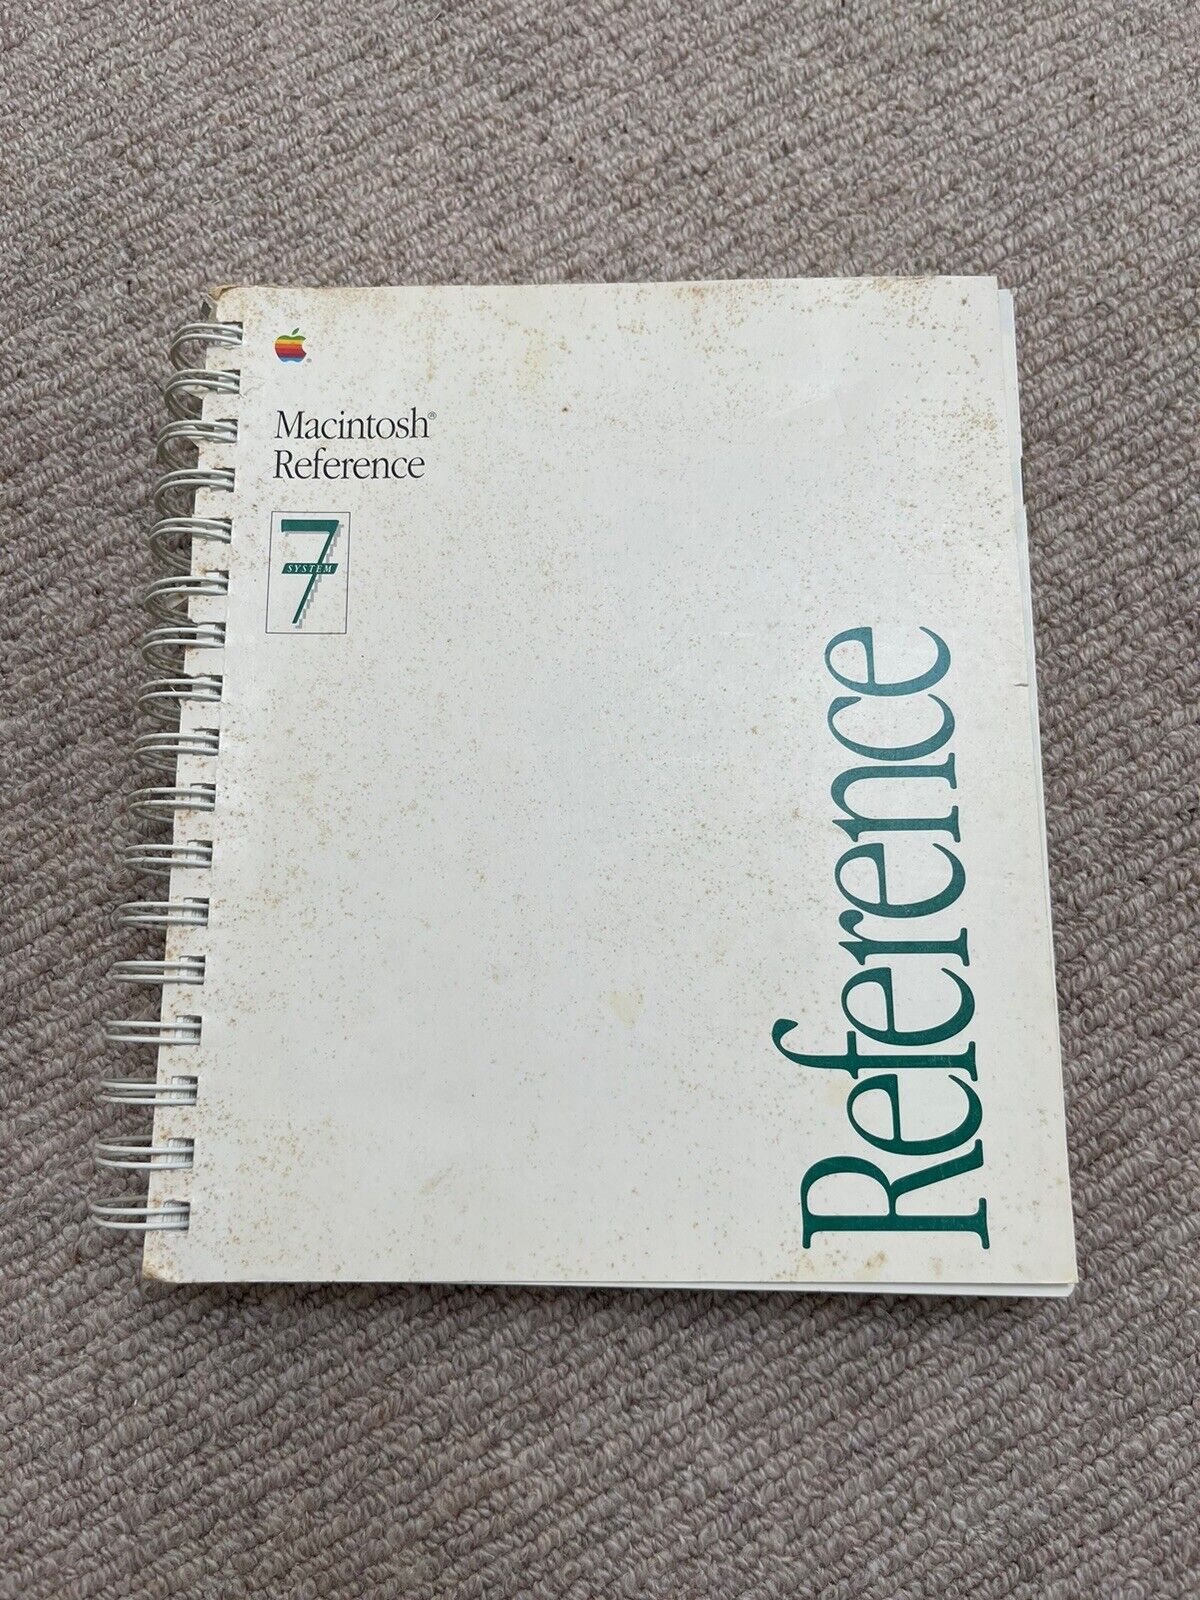 Macintosh Reference - System 7 - Book of Operations and System Reference - 1991